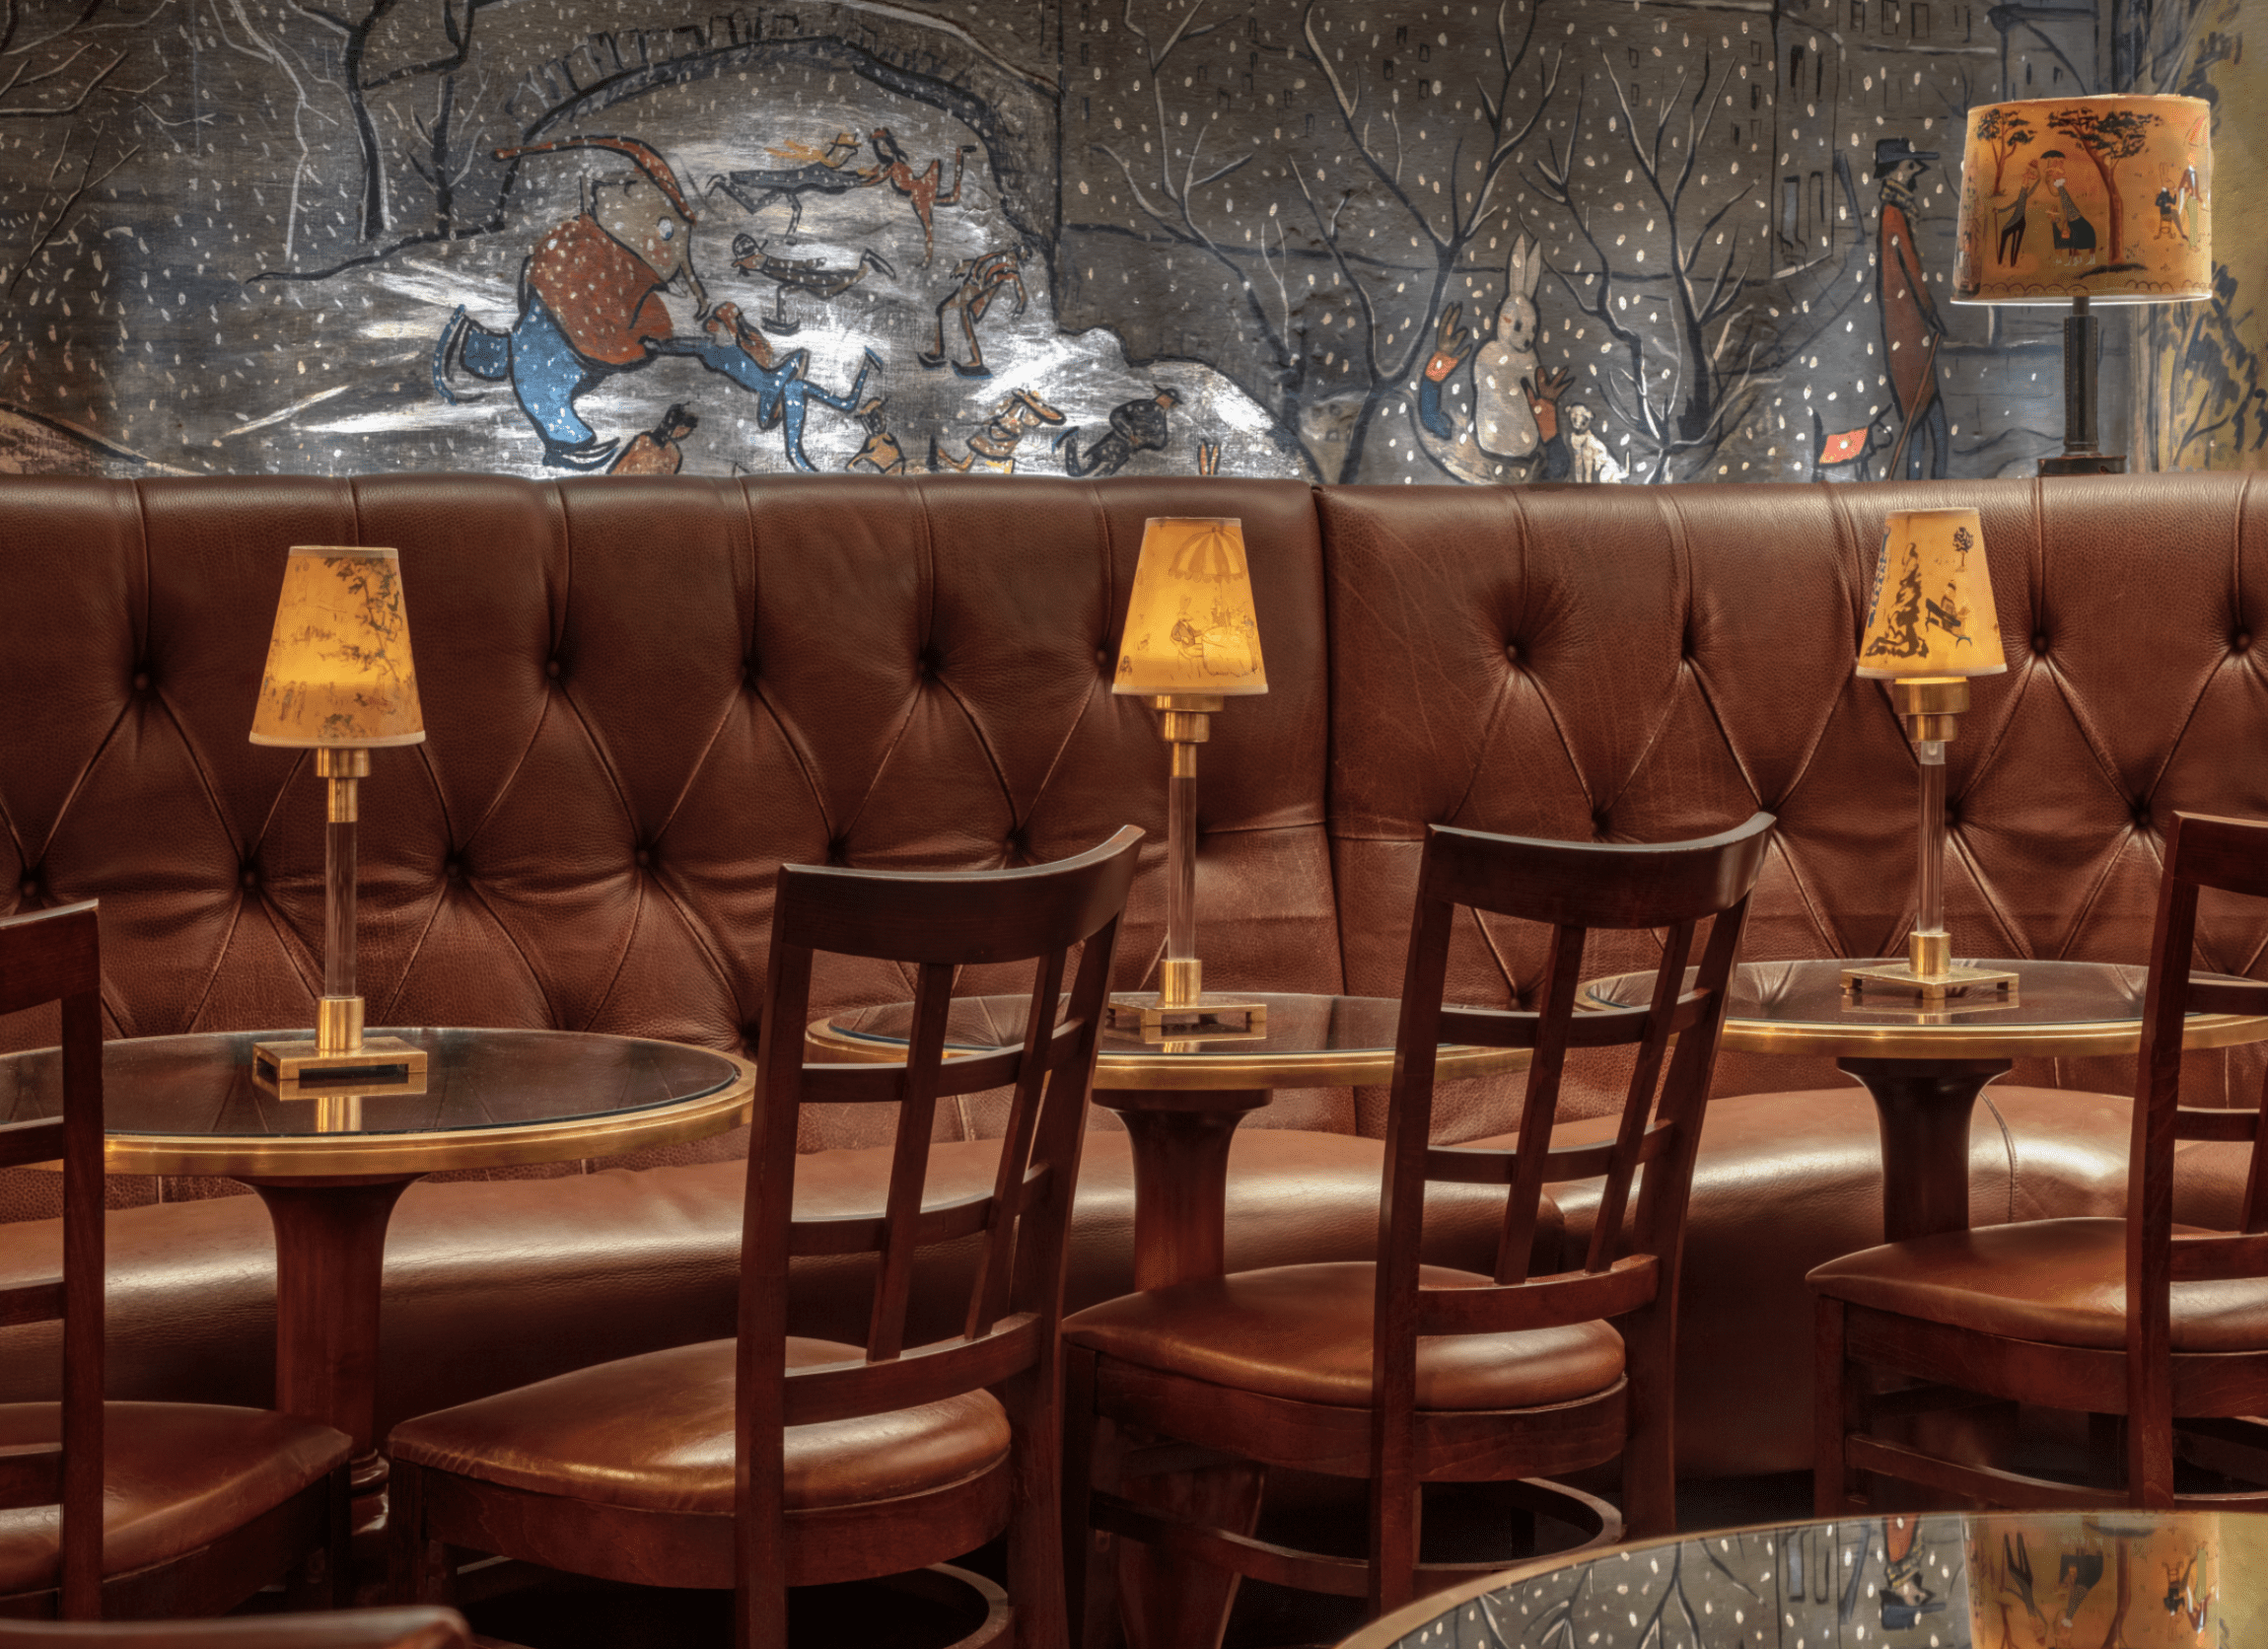 The best cocktail bars in New York | Interior of Bemelmans Bar at The Carlyle Hotel